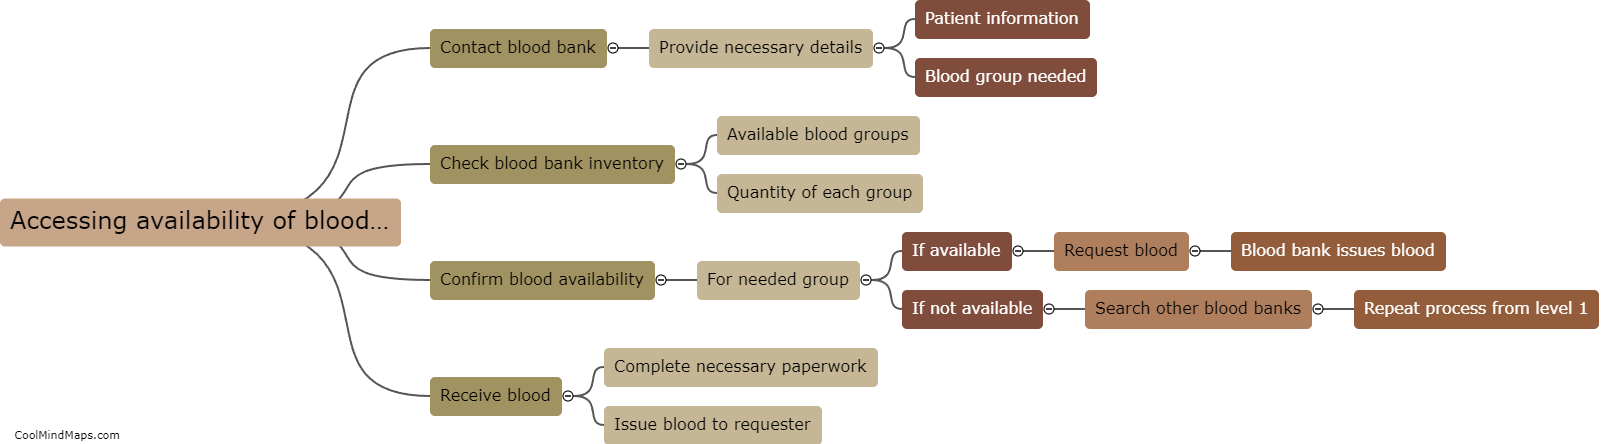 What is the process for accessing the availability of blood groups?